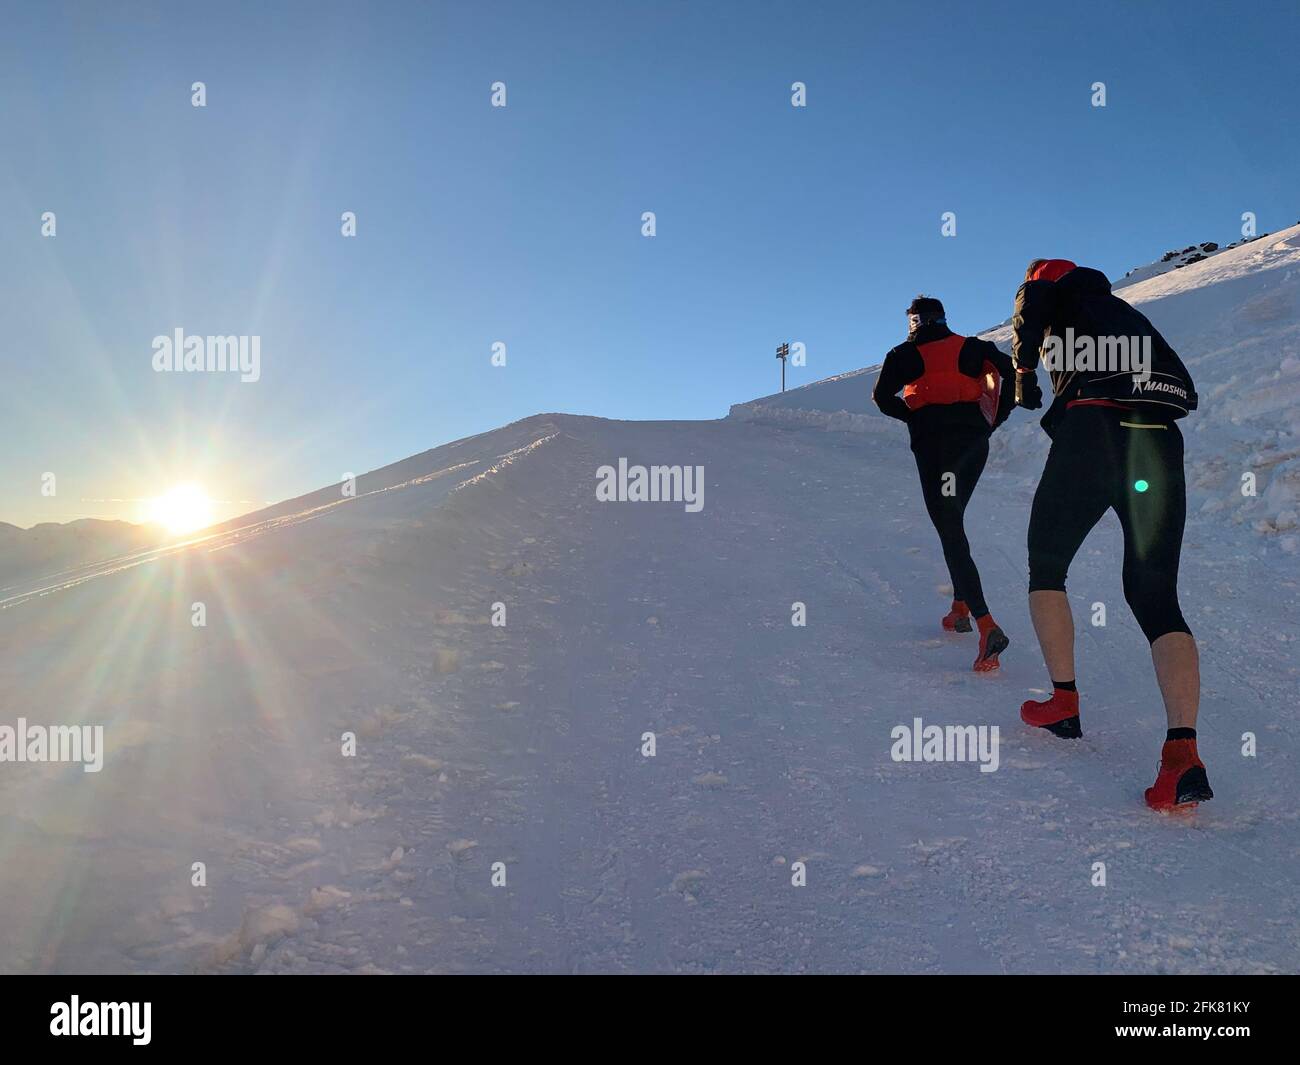 A man and a woman hiking up a snowy slope of french alps during winters. Stock Photo